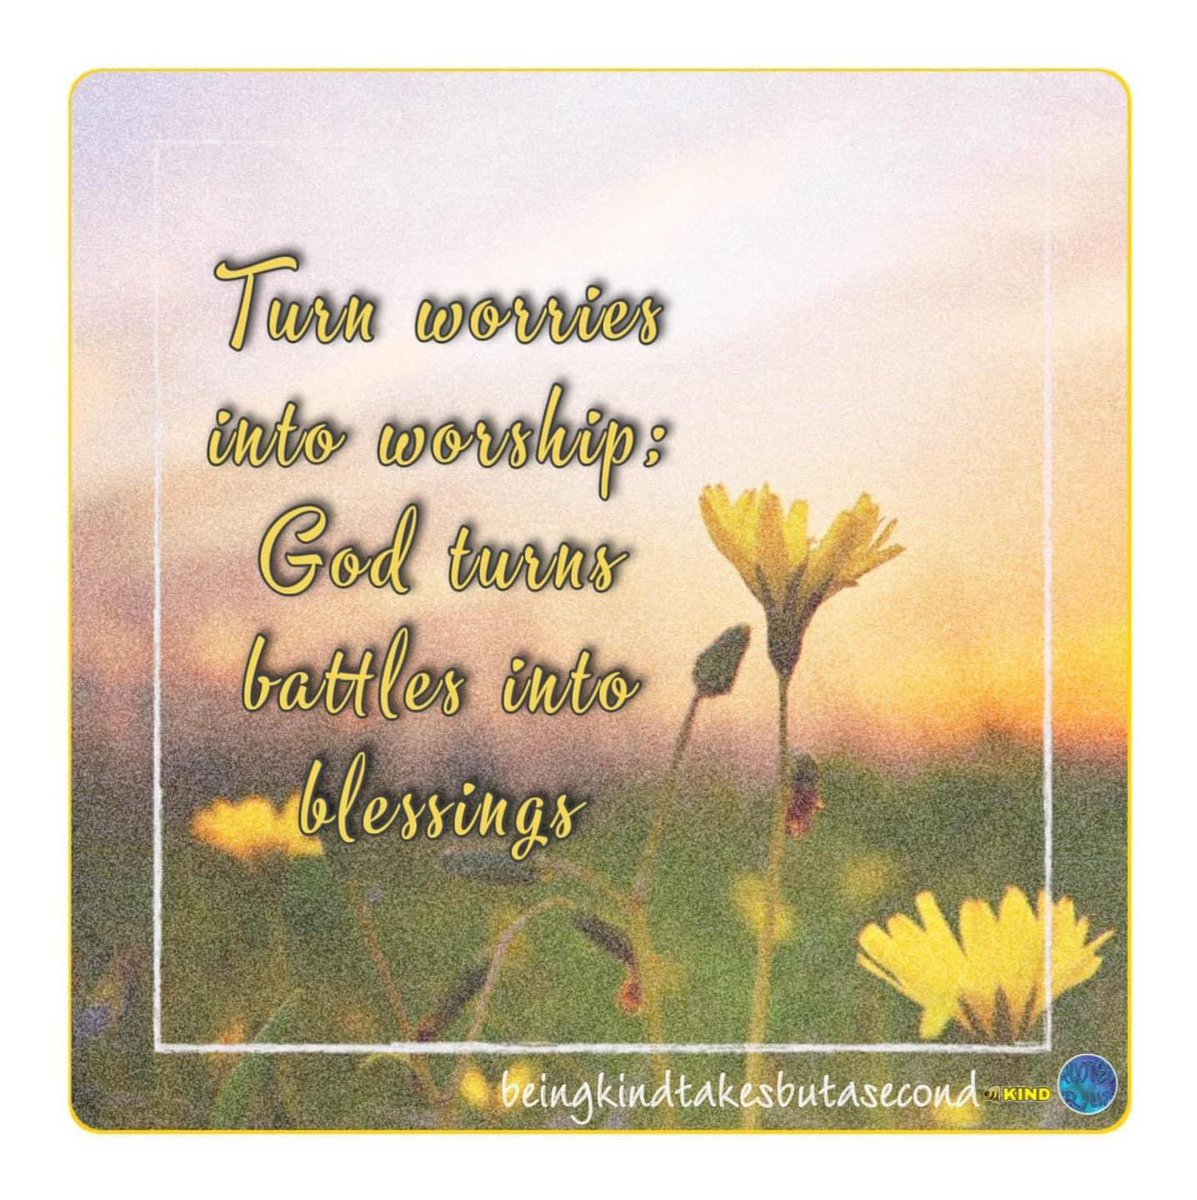 😘❣️ Turn worries into worship; God turns battles into blessings 🙋🏻‍♀️ 🐝 KIND #beekind #teamhumanity #beingkindtakesbutasecond #blessings